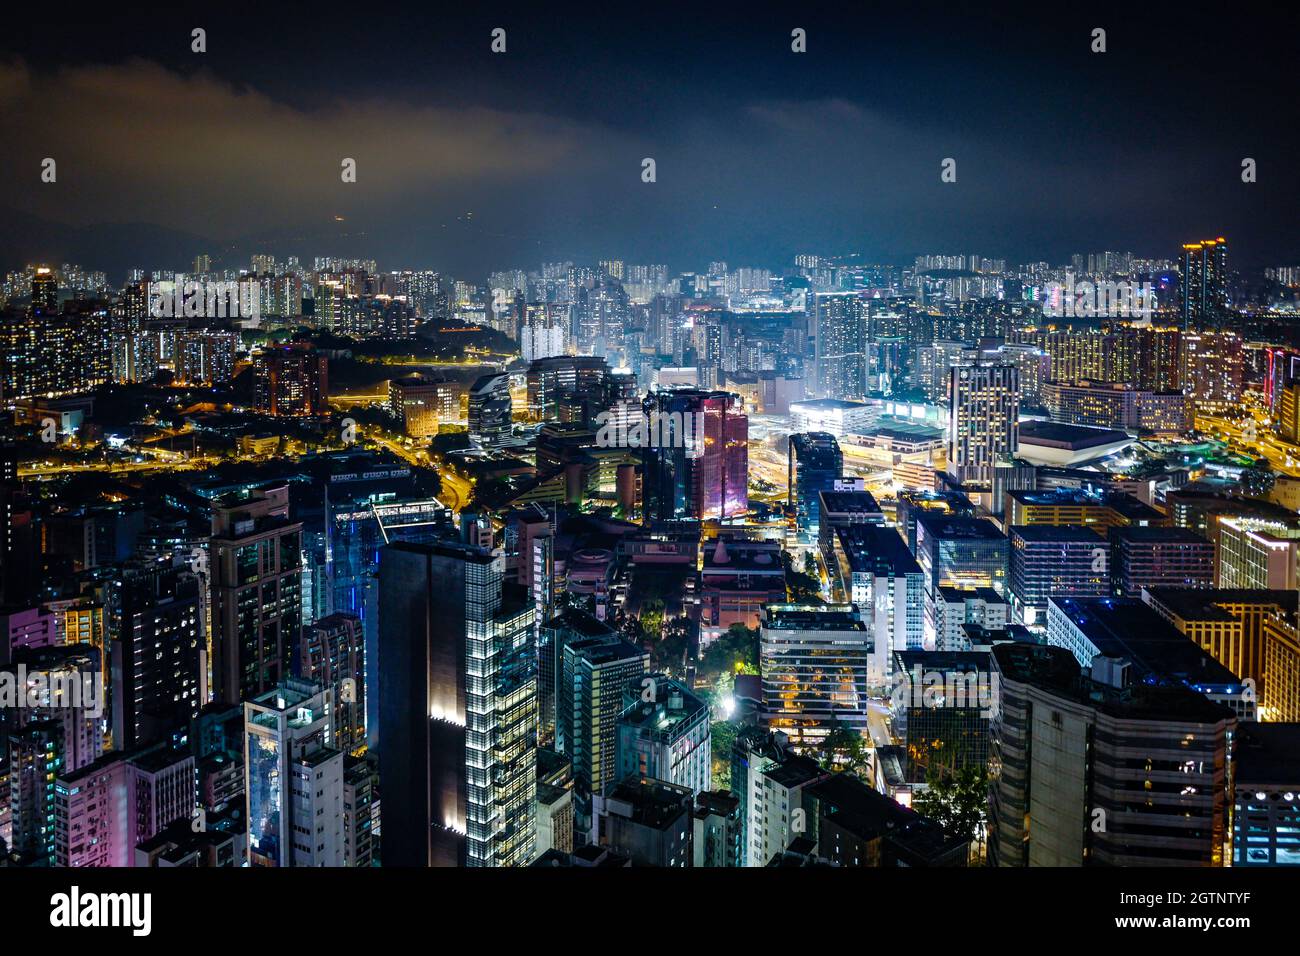 High Angle View Of Illuminated City Buildings At Night Stock Photo